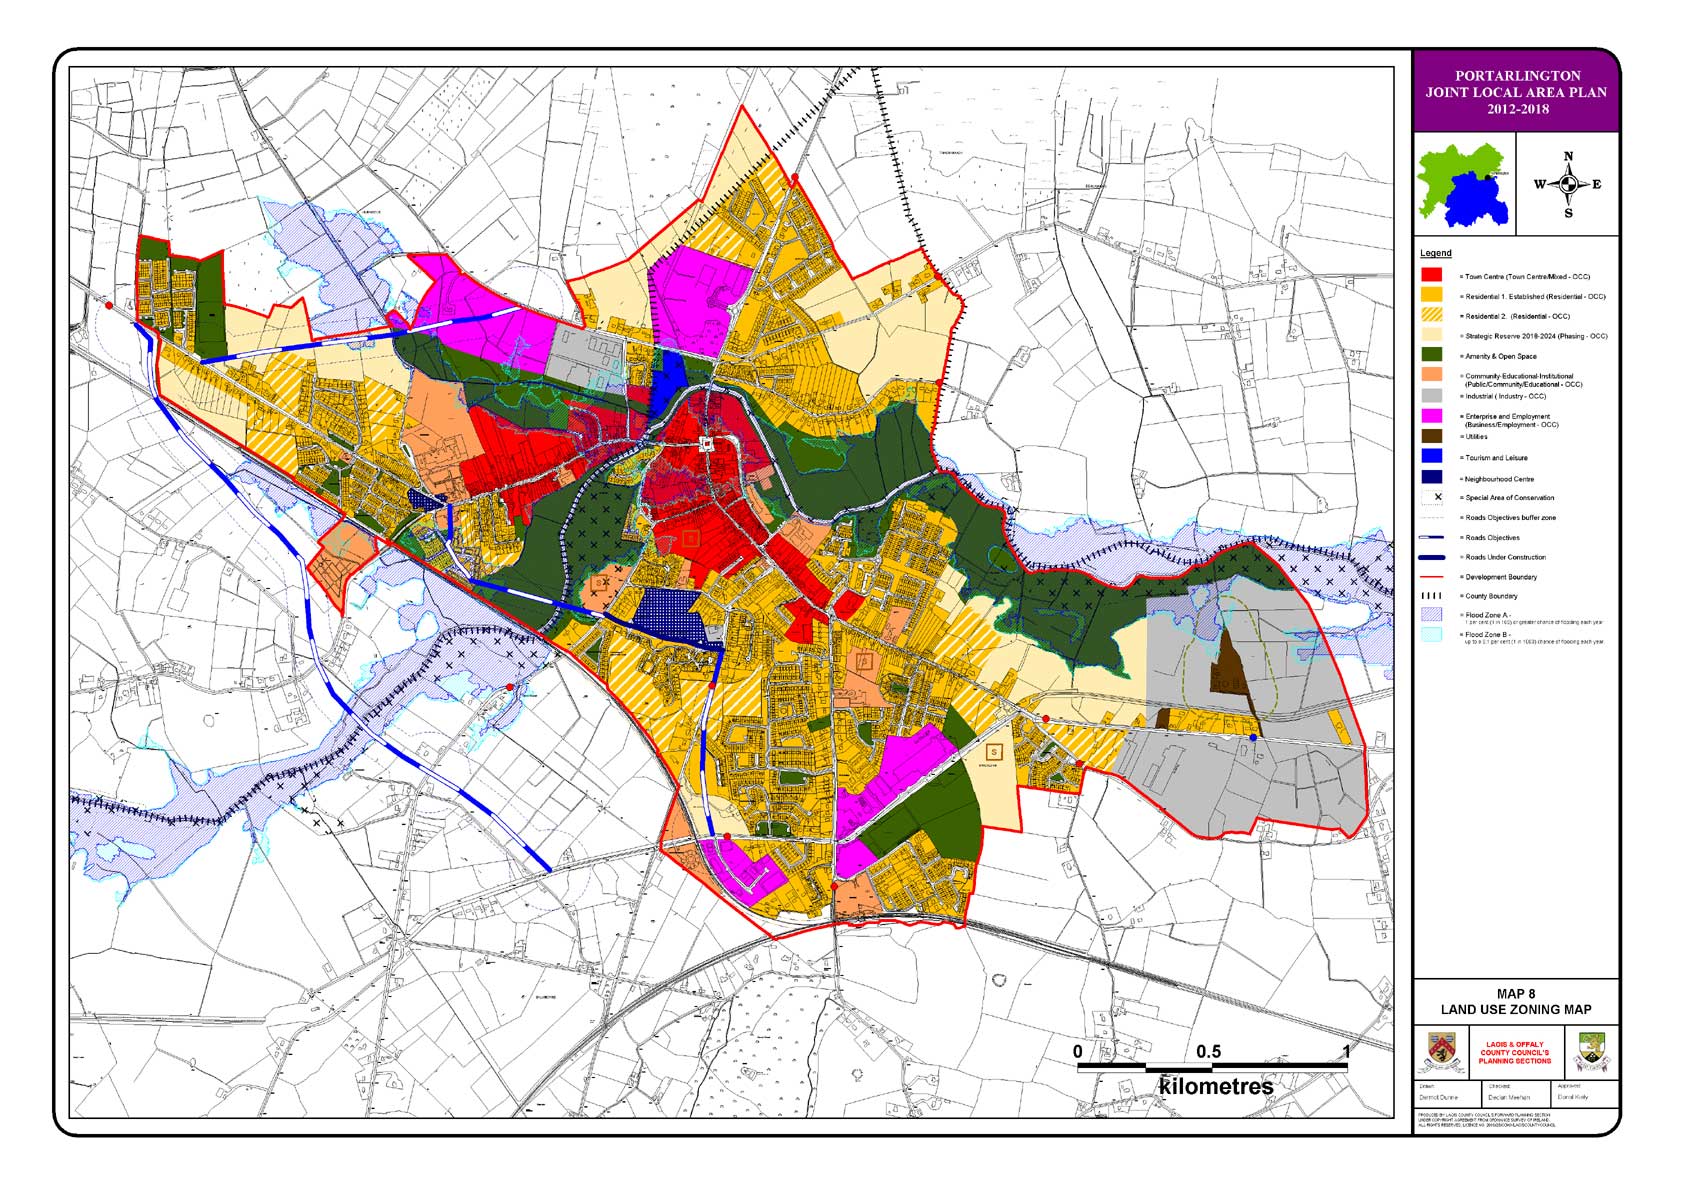  Map  8 Land  Use  Zoning Map  Laois County Council